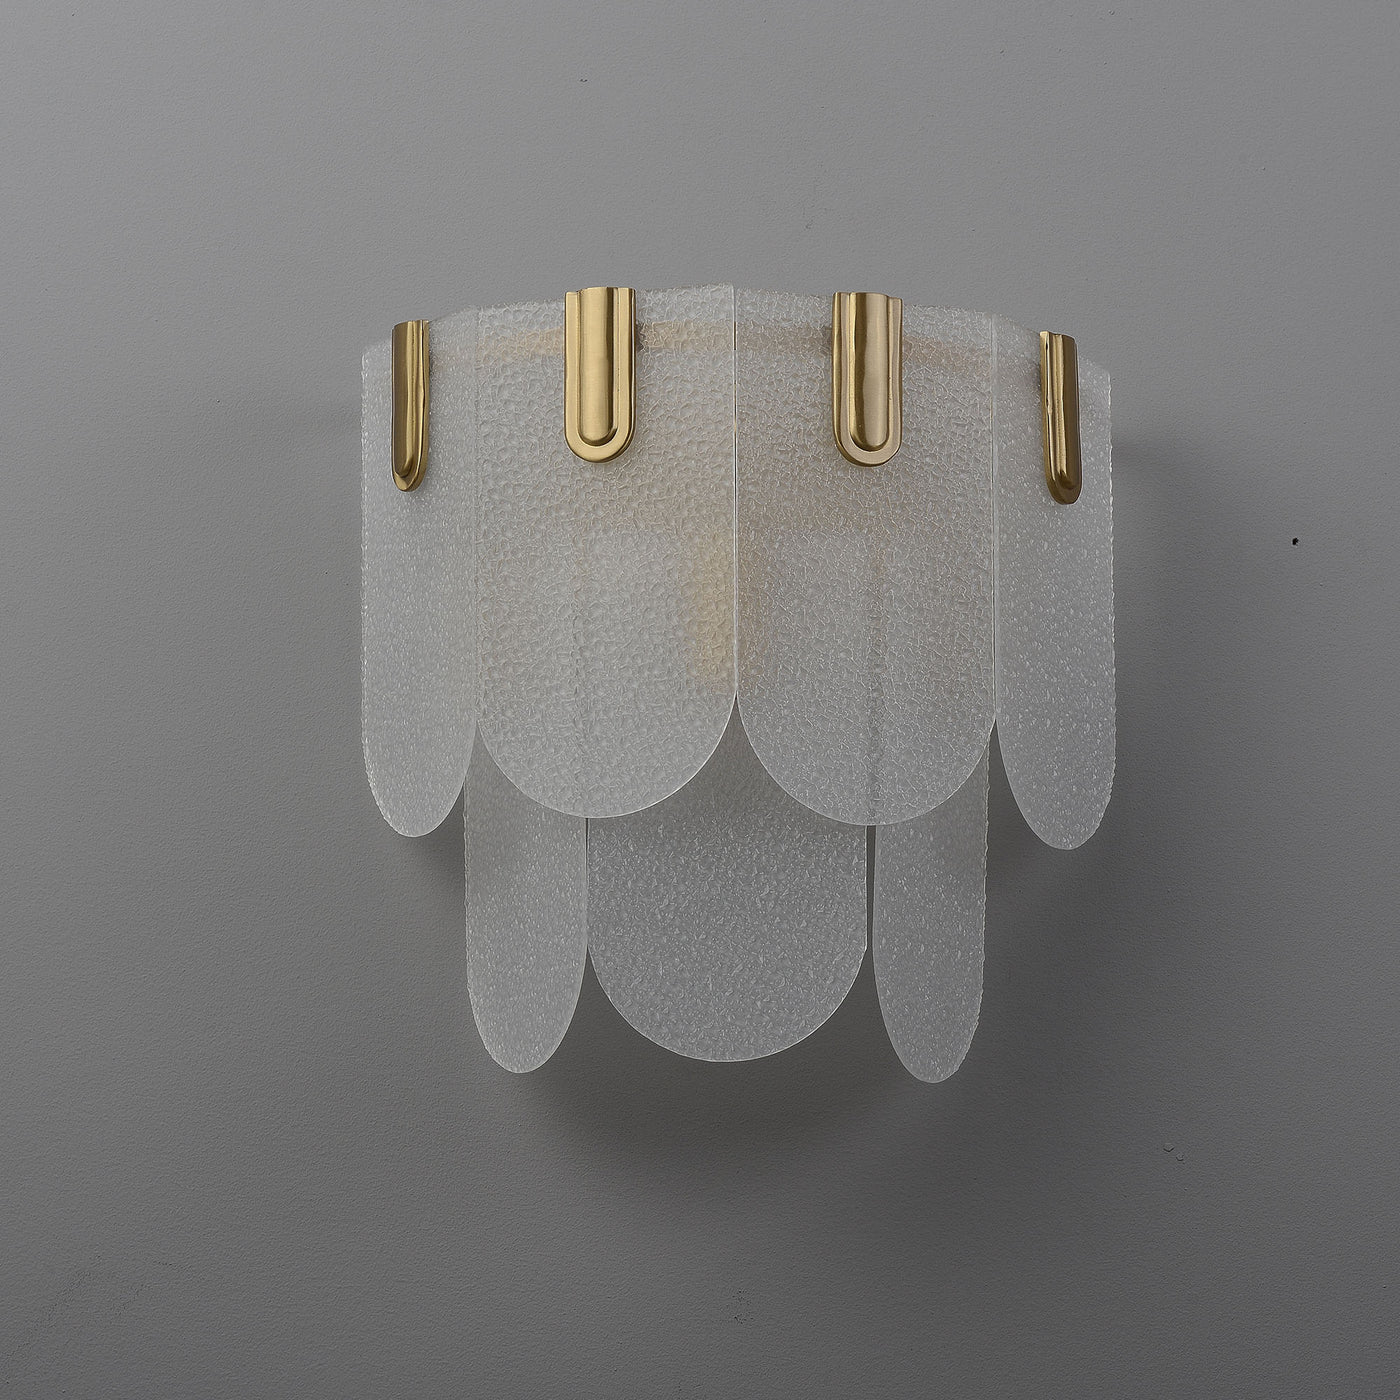 White Brass Glass Wall Sconce